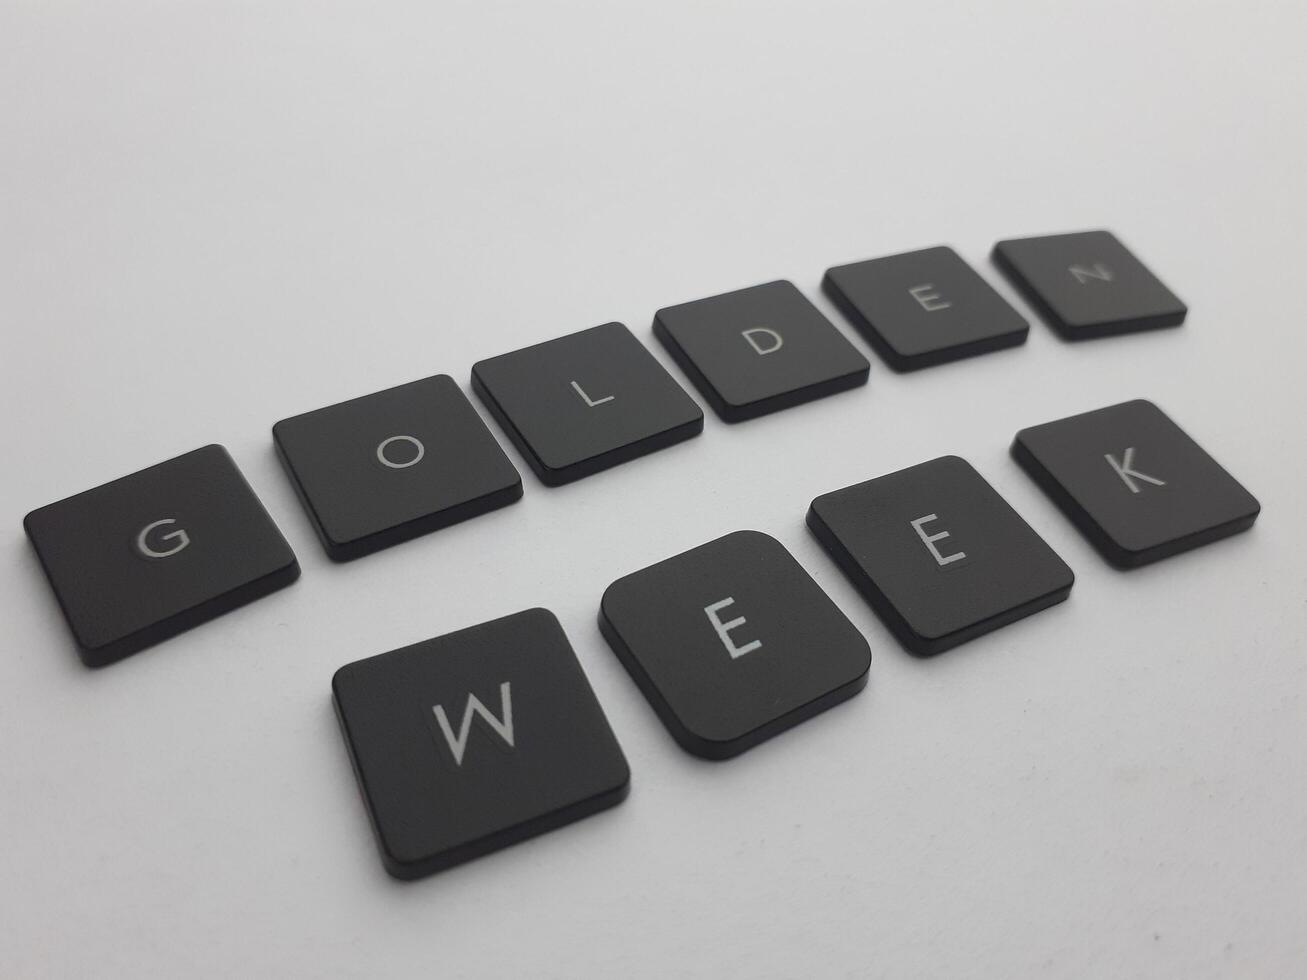 Keyboard with the word golden week written in black on a white background photo